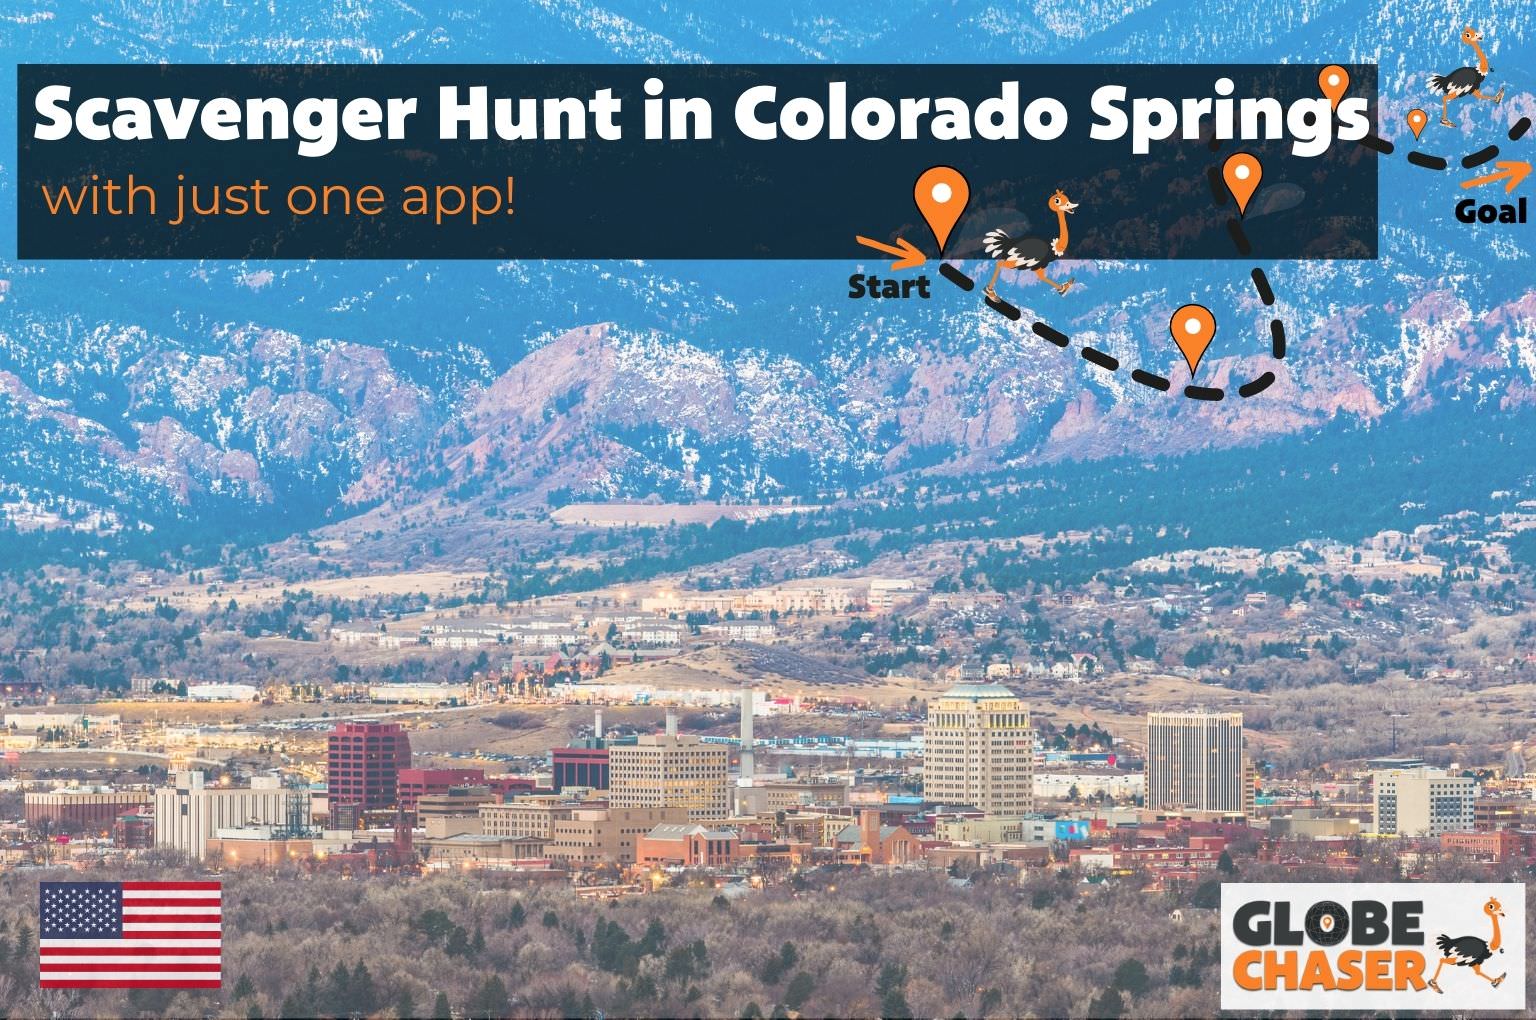 Scavenger Hunt in Colorado Springs, USA - Family Activities with the Globe Chaser App for Outdoor Fun